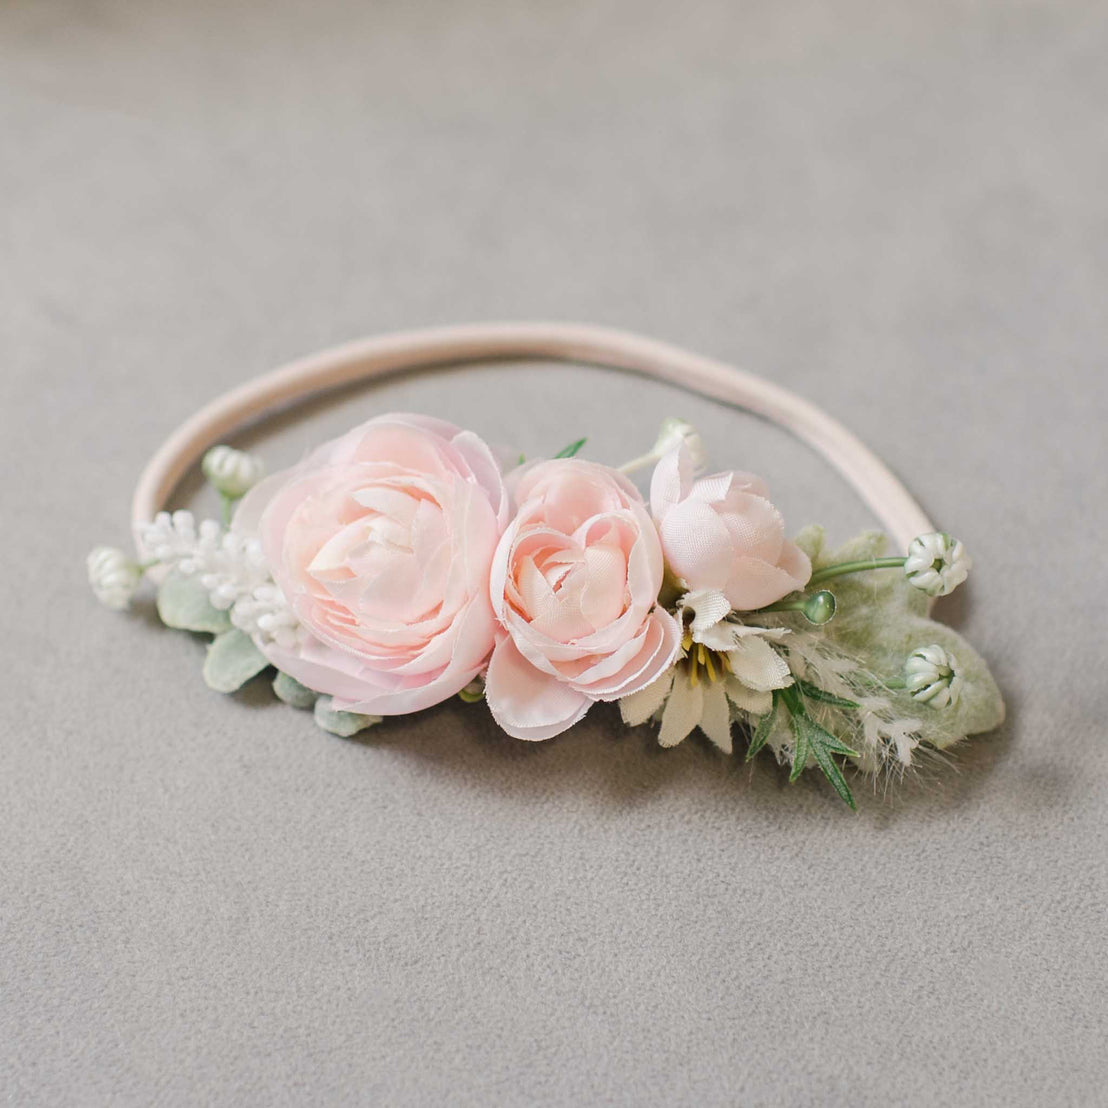 A delicate Joli Flower Headband featuring soft pink roses and white blossoms on a pale grey background, perfect for a boutique baptism.